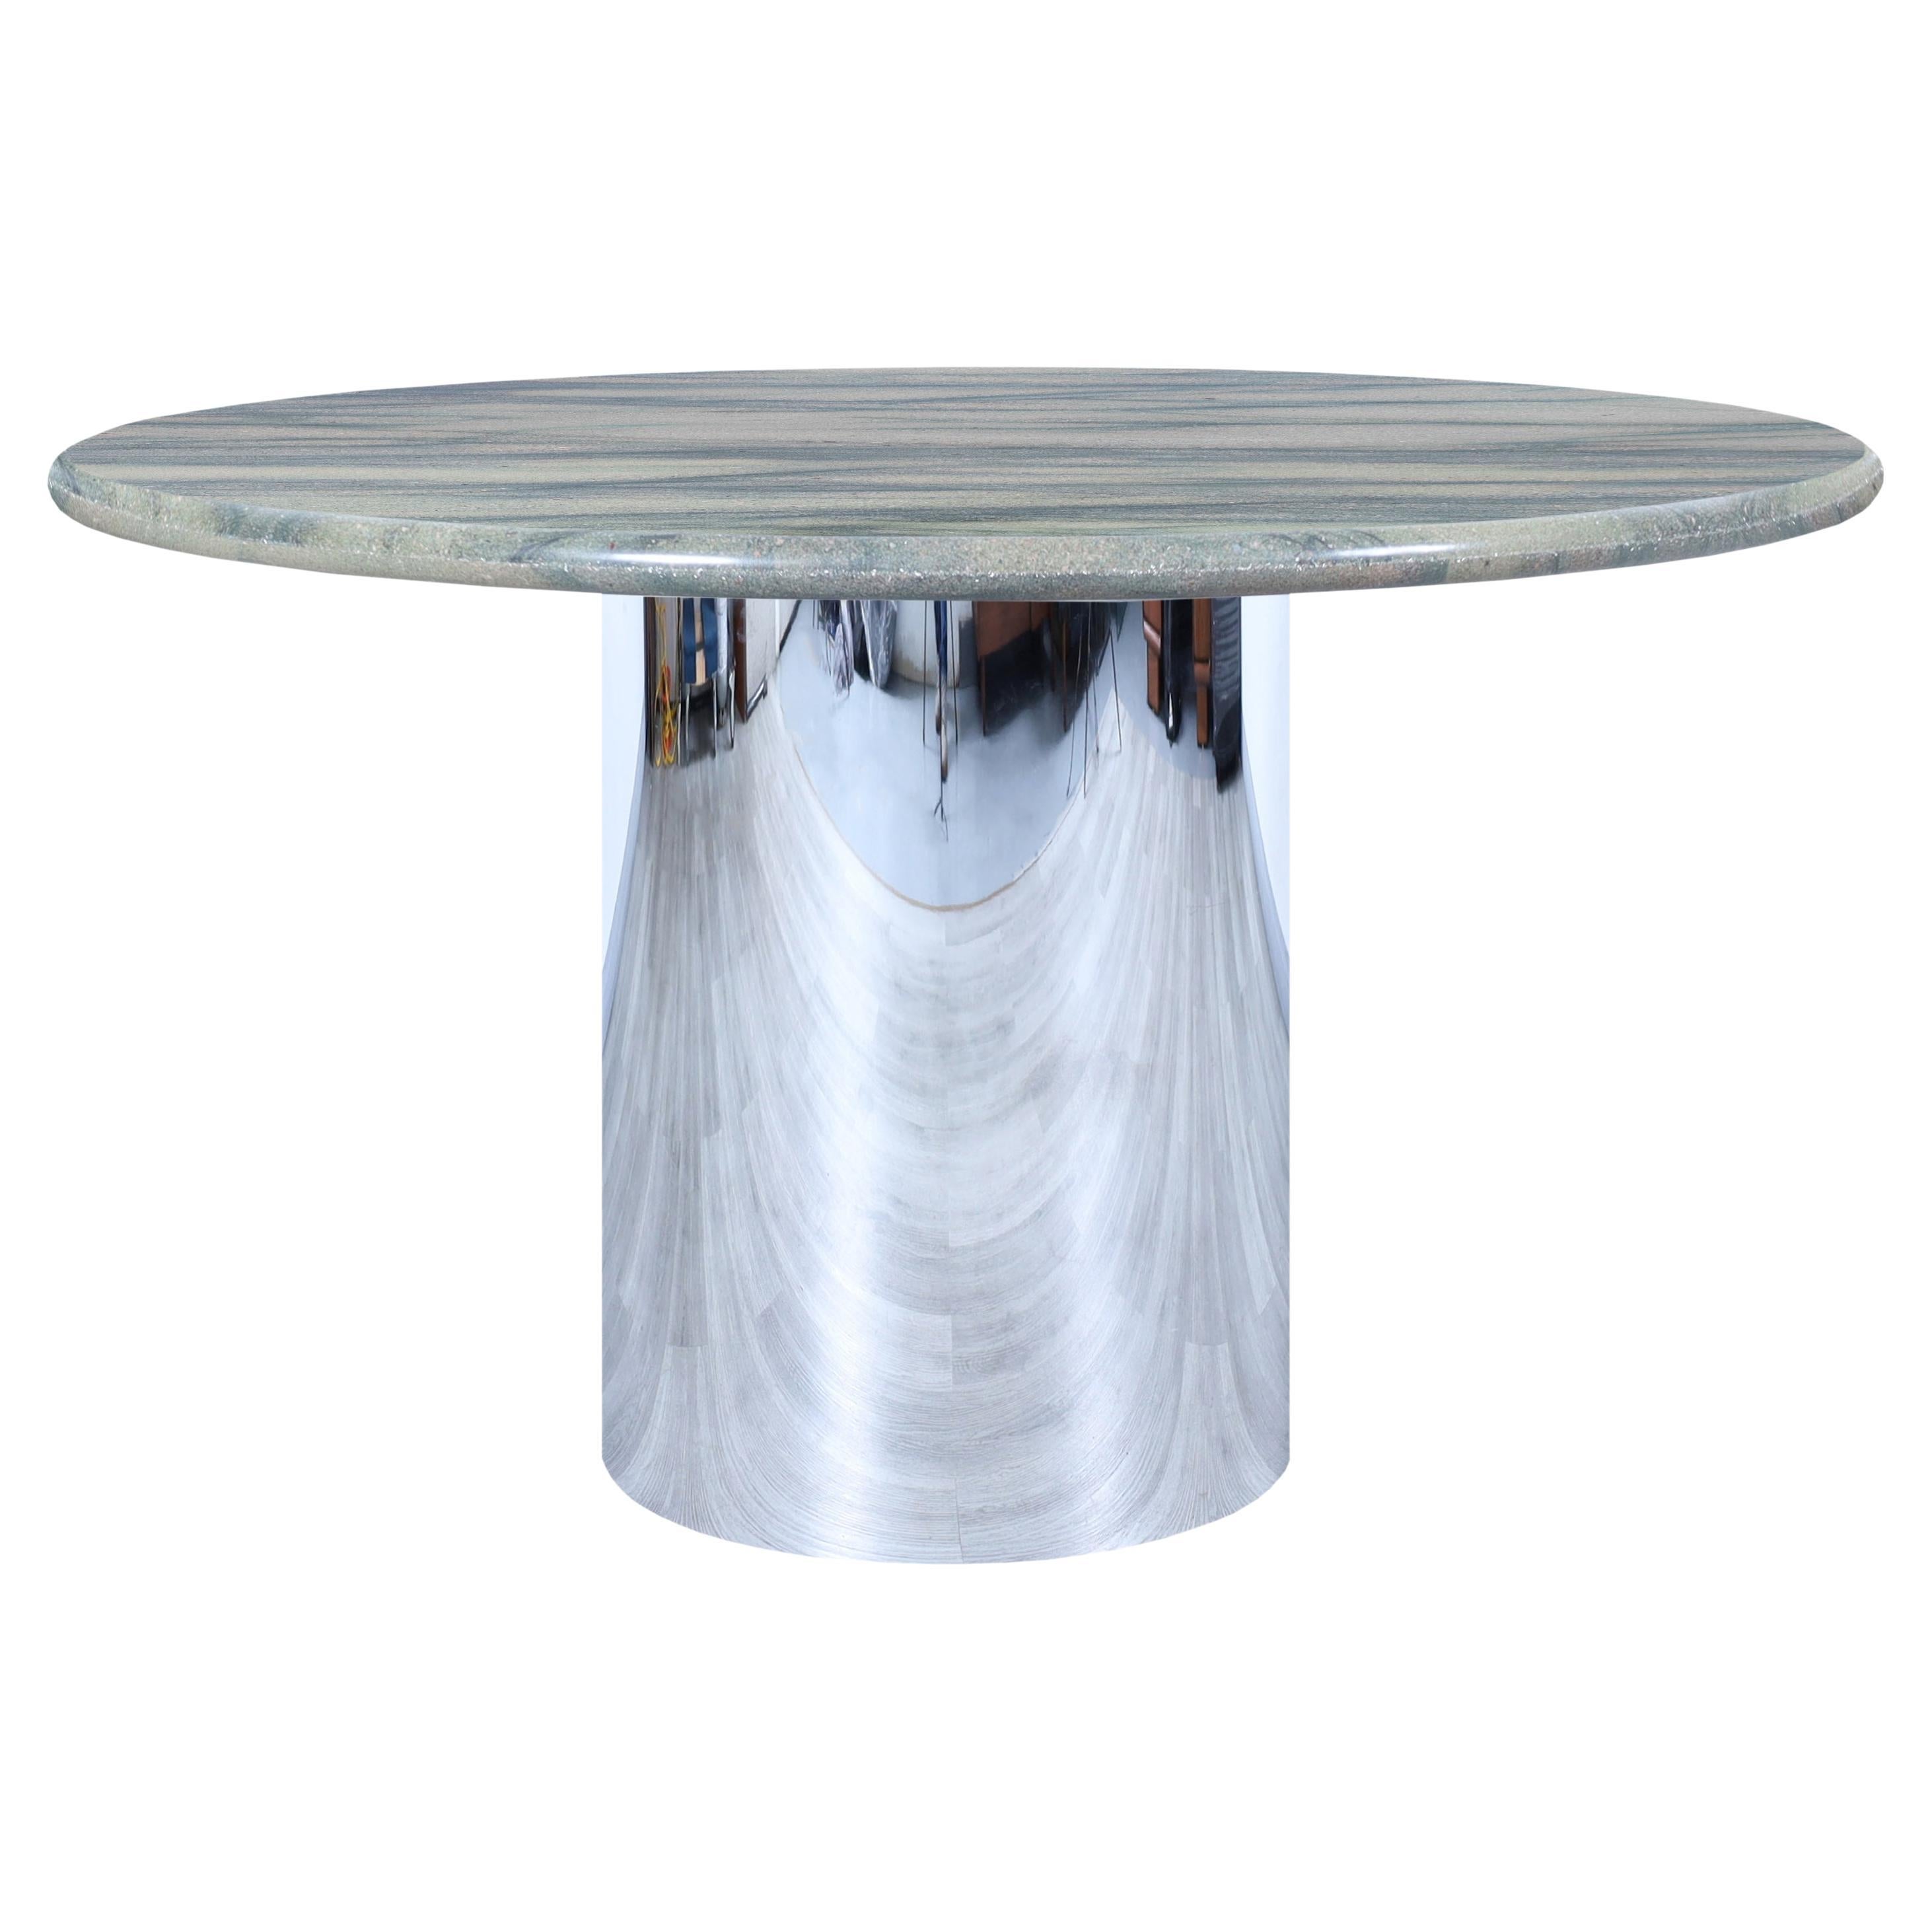 Vintage Marble and Stainless Steel Round Dining Table For Sale